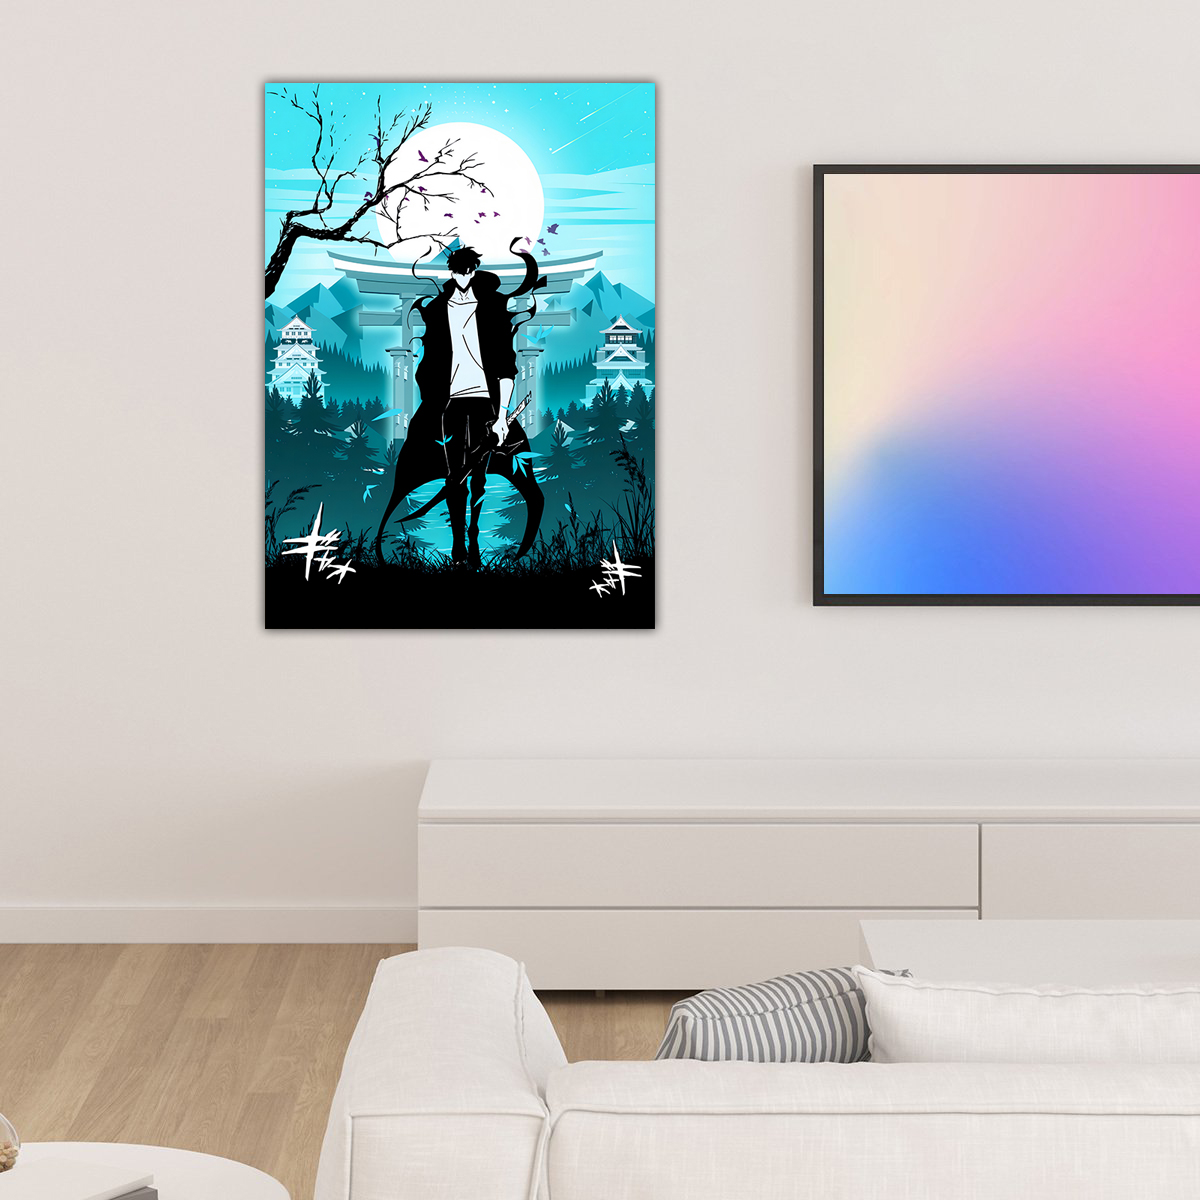 Buy Solo Leveling minimal anime Poster @ $15.60